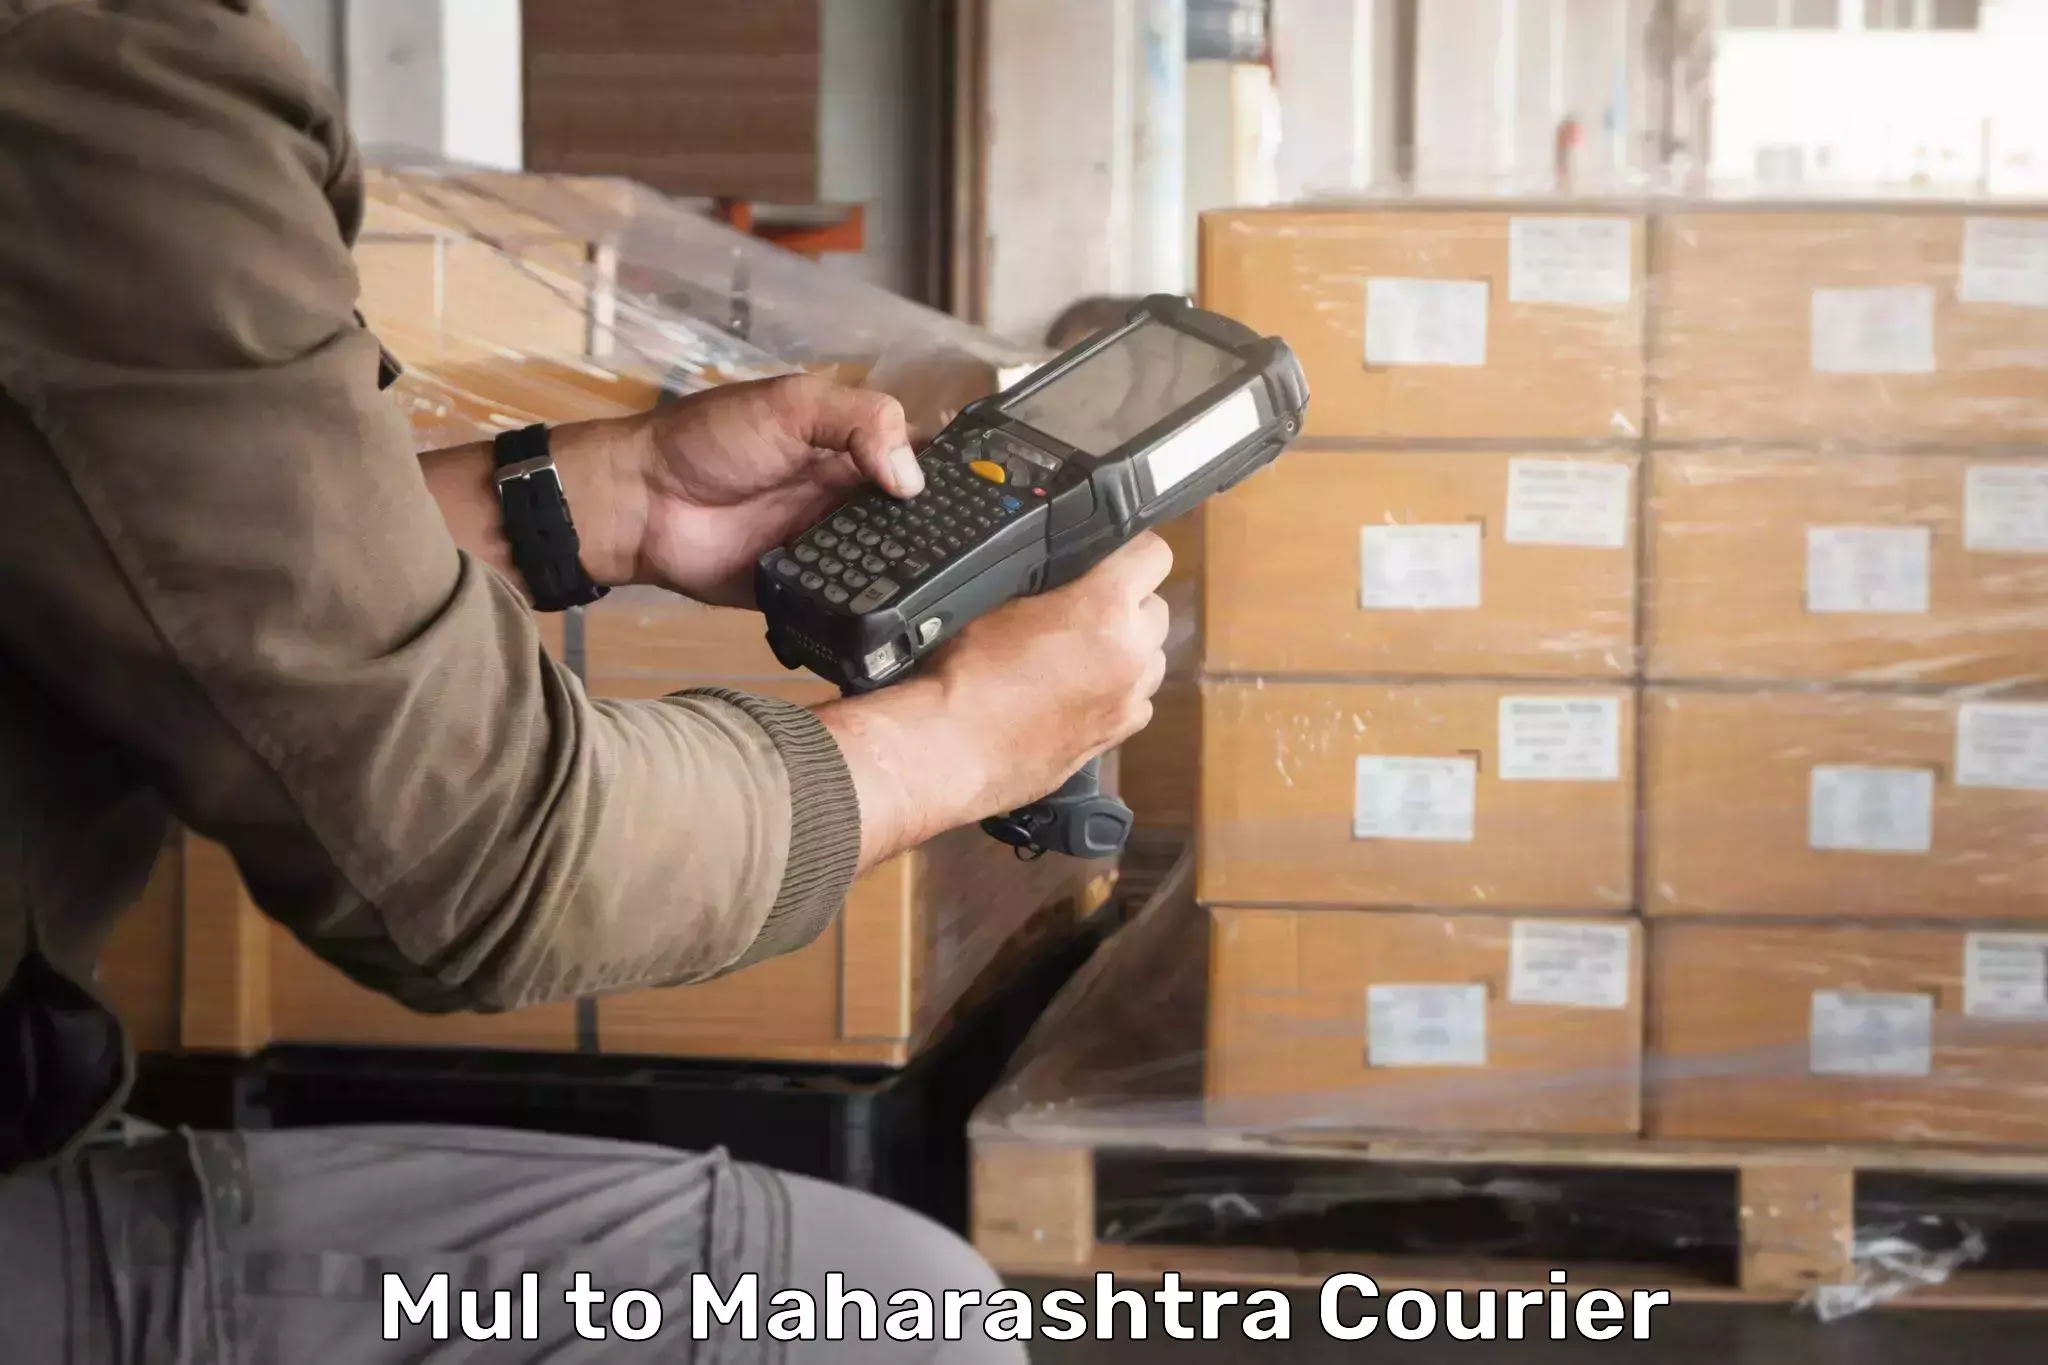 Courier service partnerships in Mul to Kalyan Dombivli